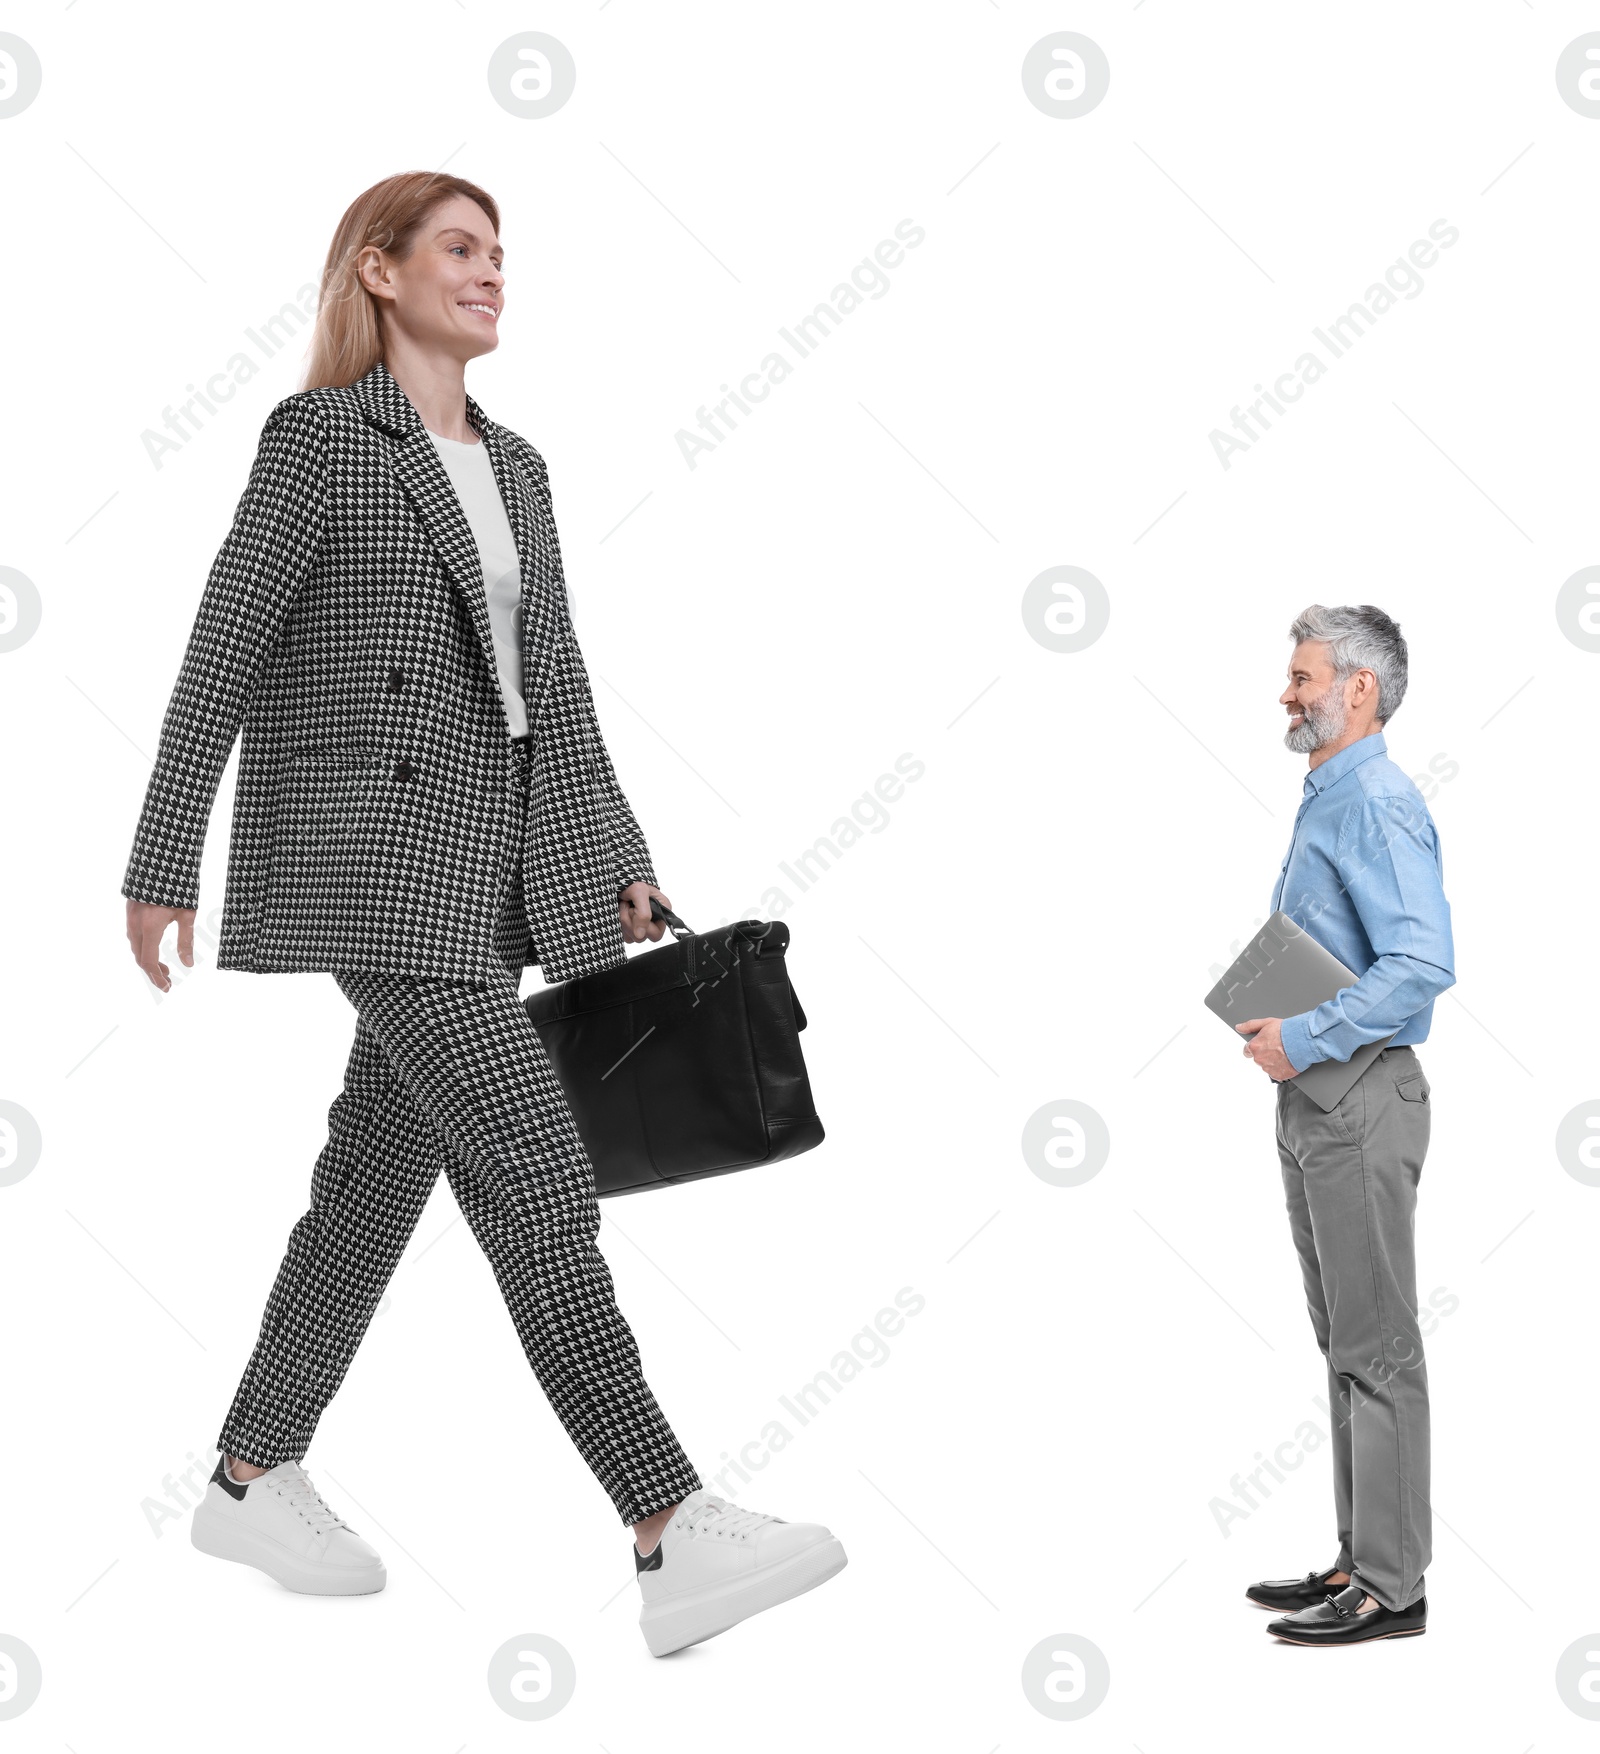 Image of Giant woman and small man on white background